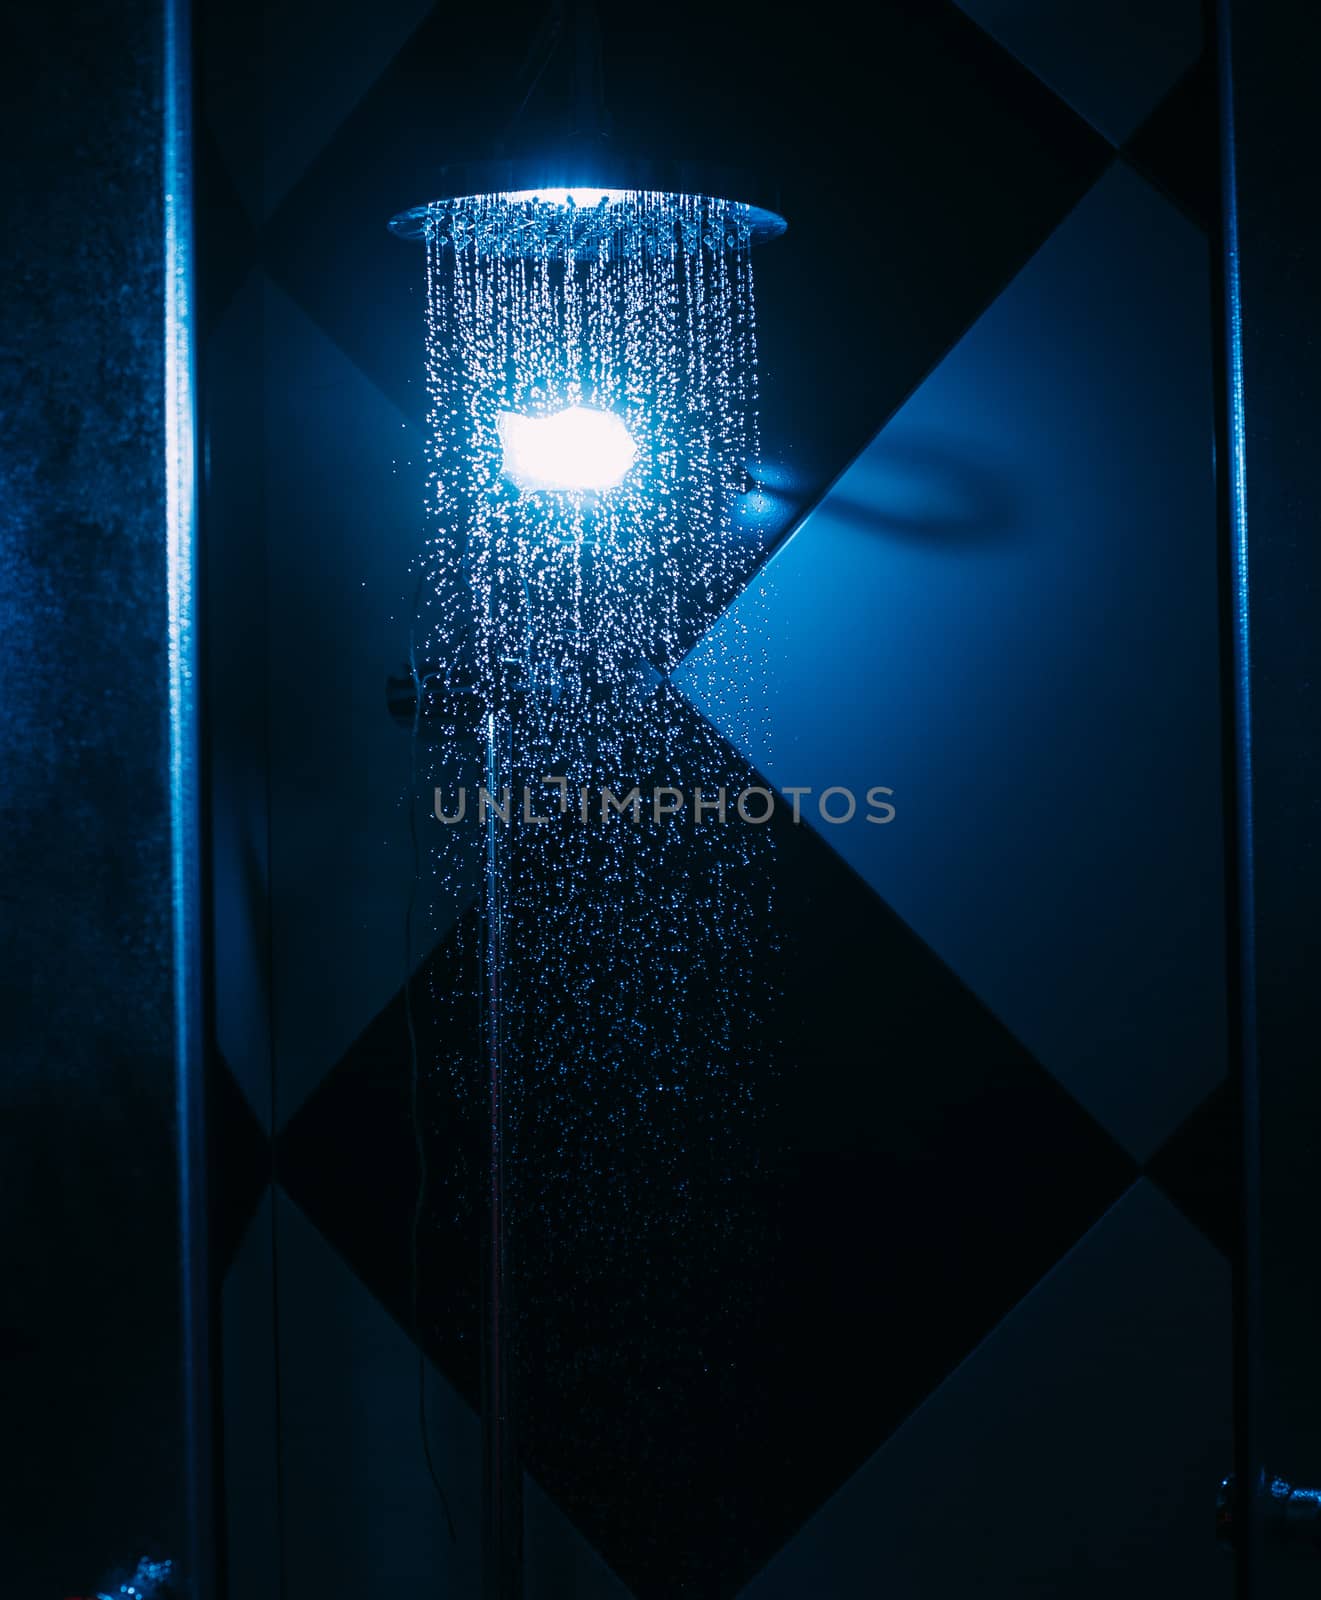 Drops of water fall from a watering can in the shower in blue li by Opikanets